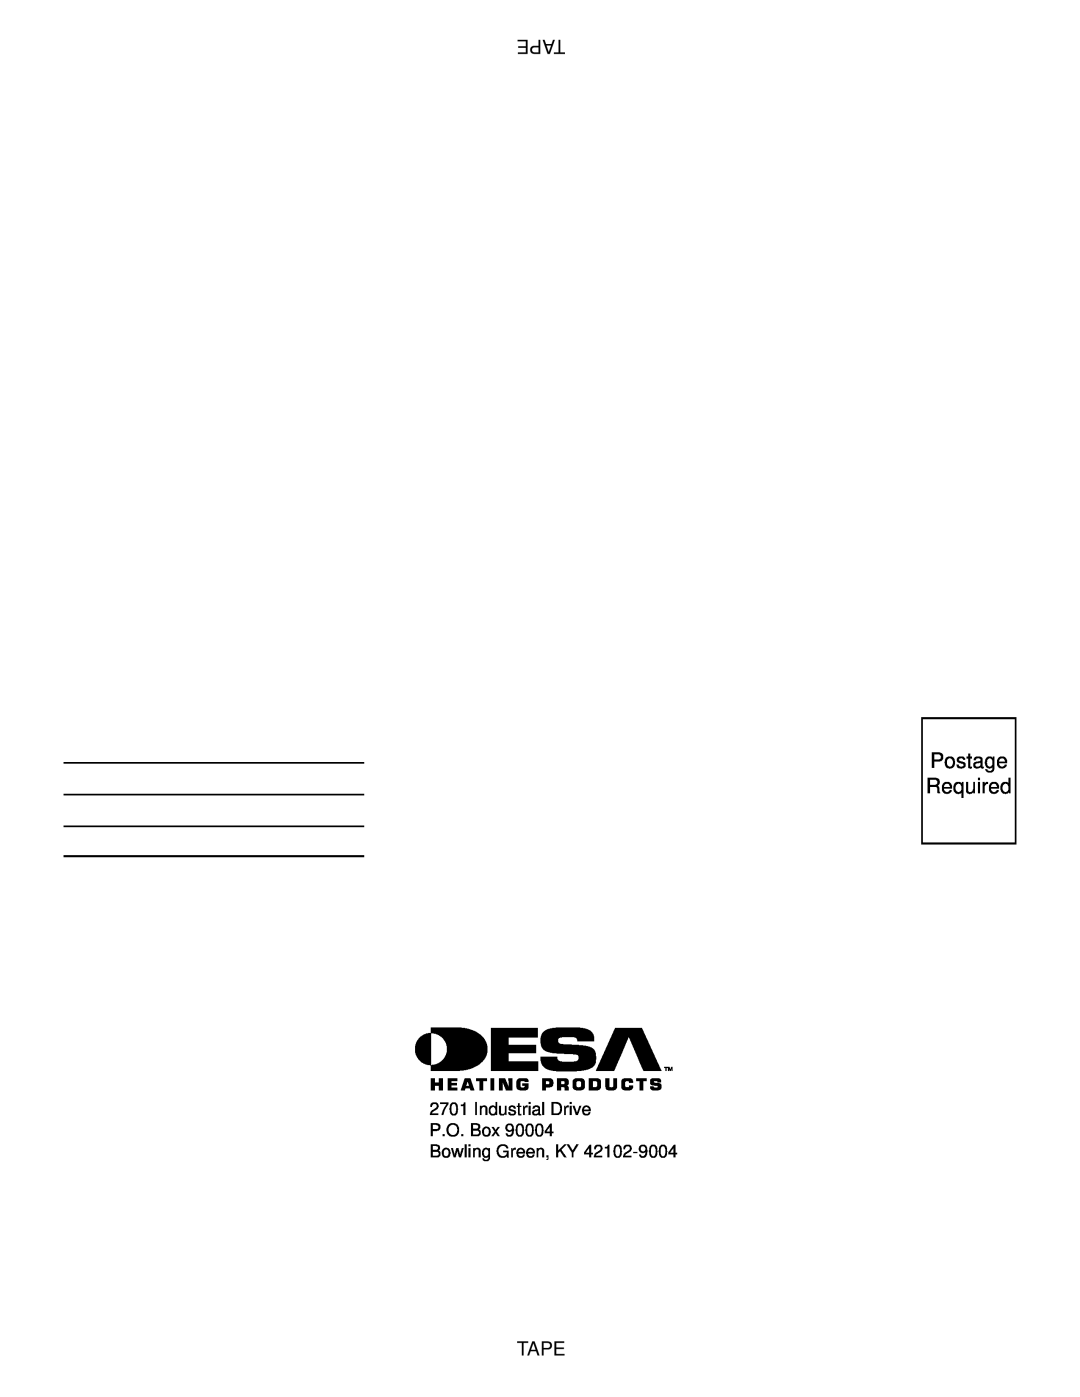 Desa VTGF33NRA installation manual Postage Required, Tape, Industrial Drive P.O. Box Bowling Green, KY 